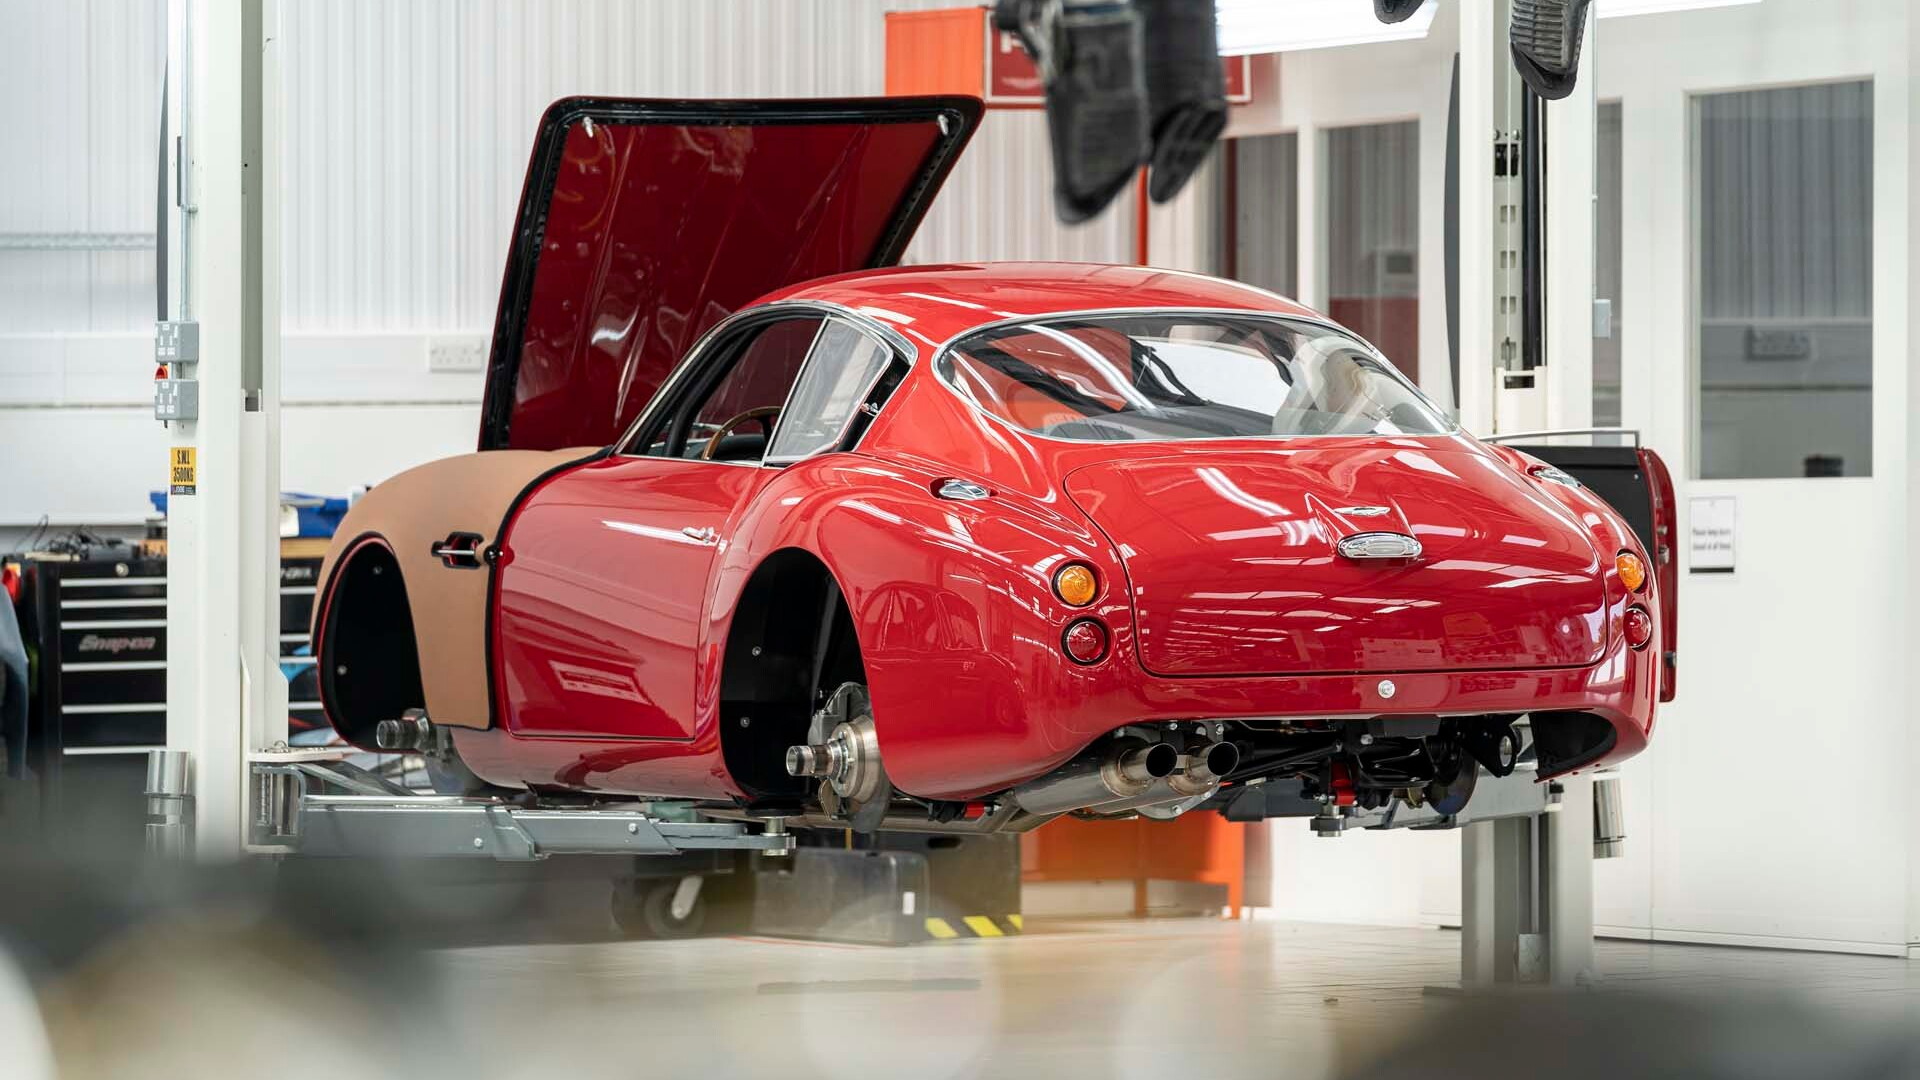 Production of bodies for Aston Martin DB4 GT Zagato continuation models